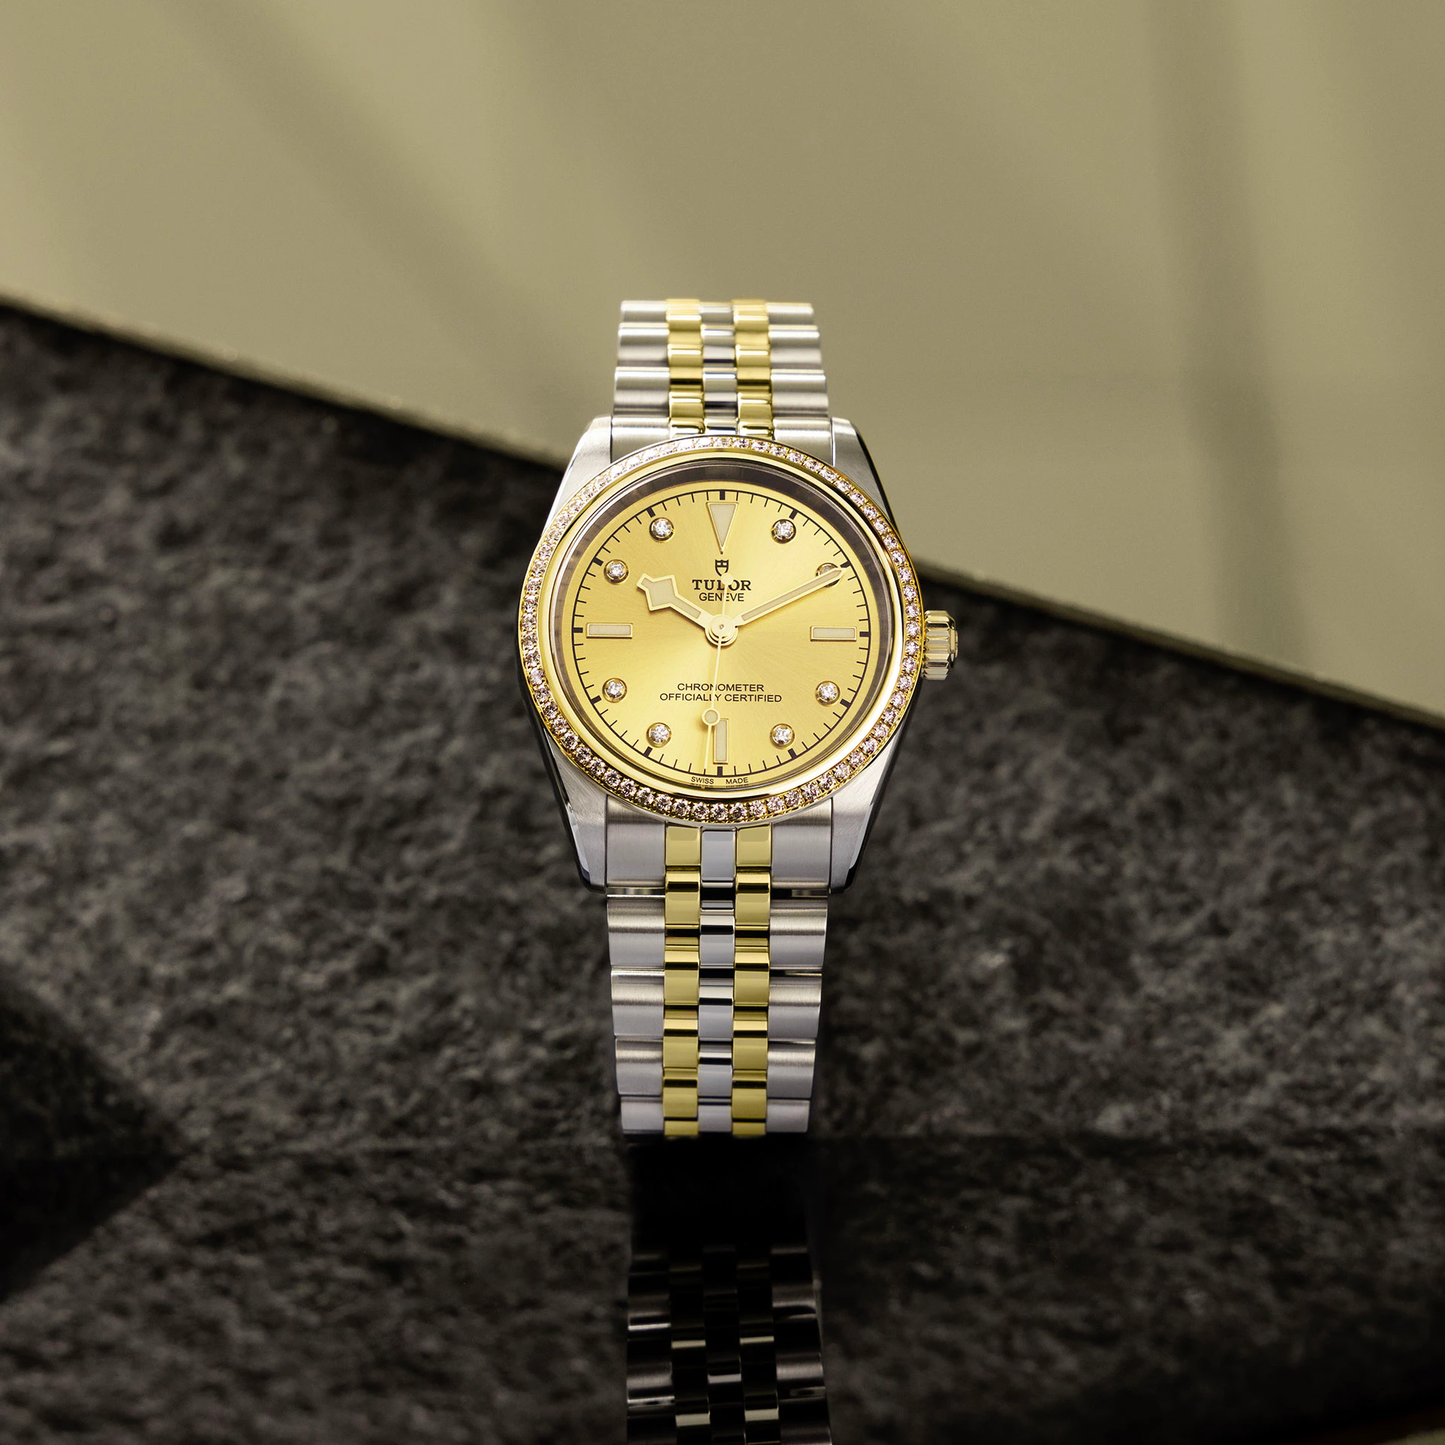 Tudor Black Bay 36 S&G, 316L Stainless Steel, 18k Yellow Gold and Diamonds, Ref# M79653-0007, Main view